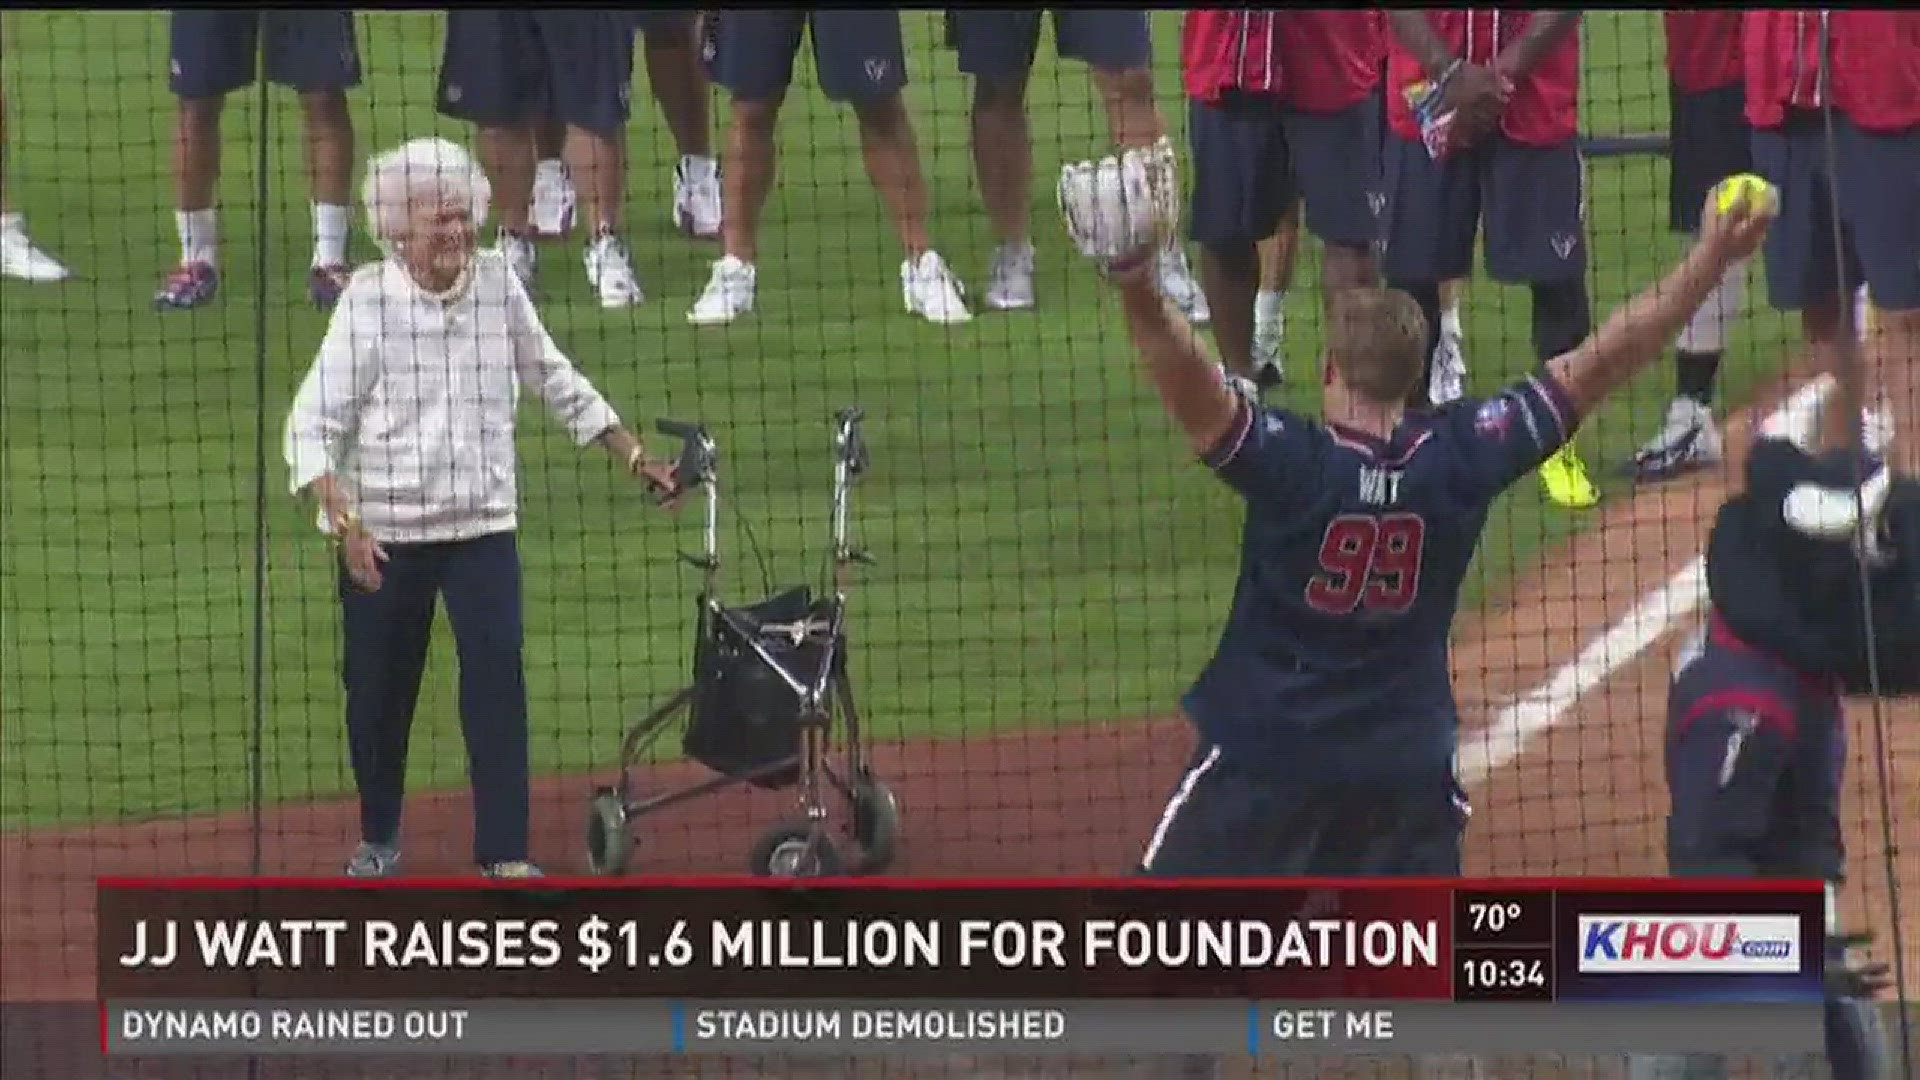 The fourth annual JJ Watt Charity Softball Classic raised $1.6 million dollars on Saturday. The Texans' star played well, even hitting a homer and then spoke to the media at a press conference after the game.